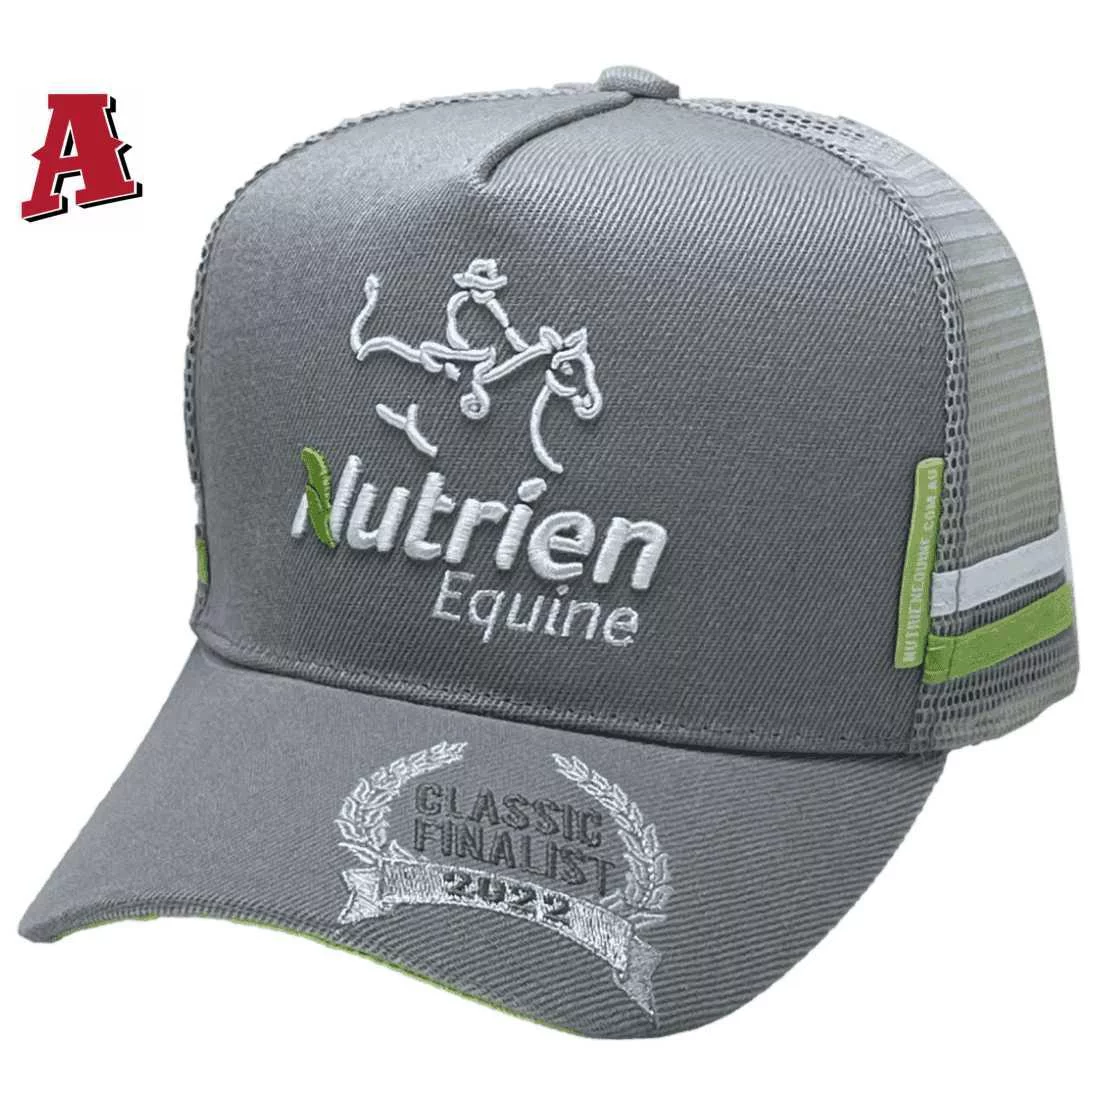 Nutrien Equine Tamworth NSW HP Midrange Aussie Trucker Hats with Australian Head Fit Crown and Double Side Bands Silver Grey Lime White